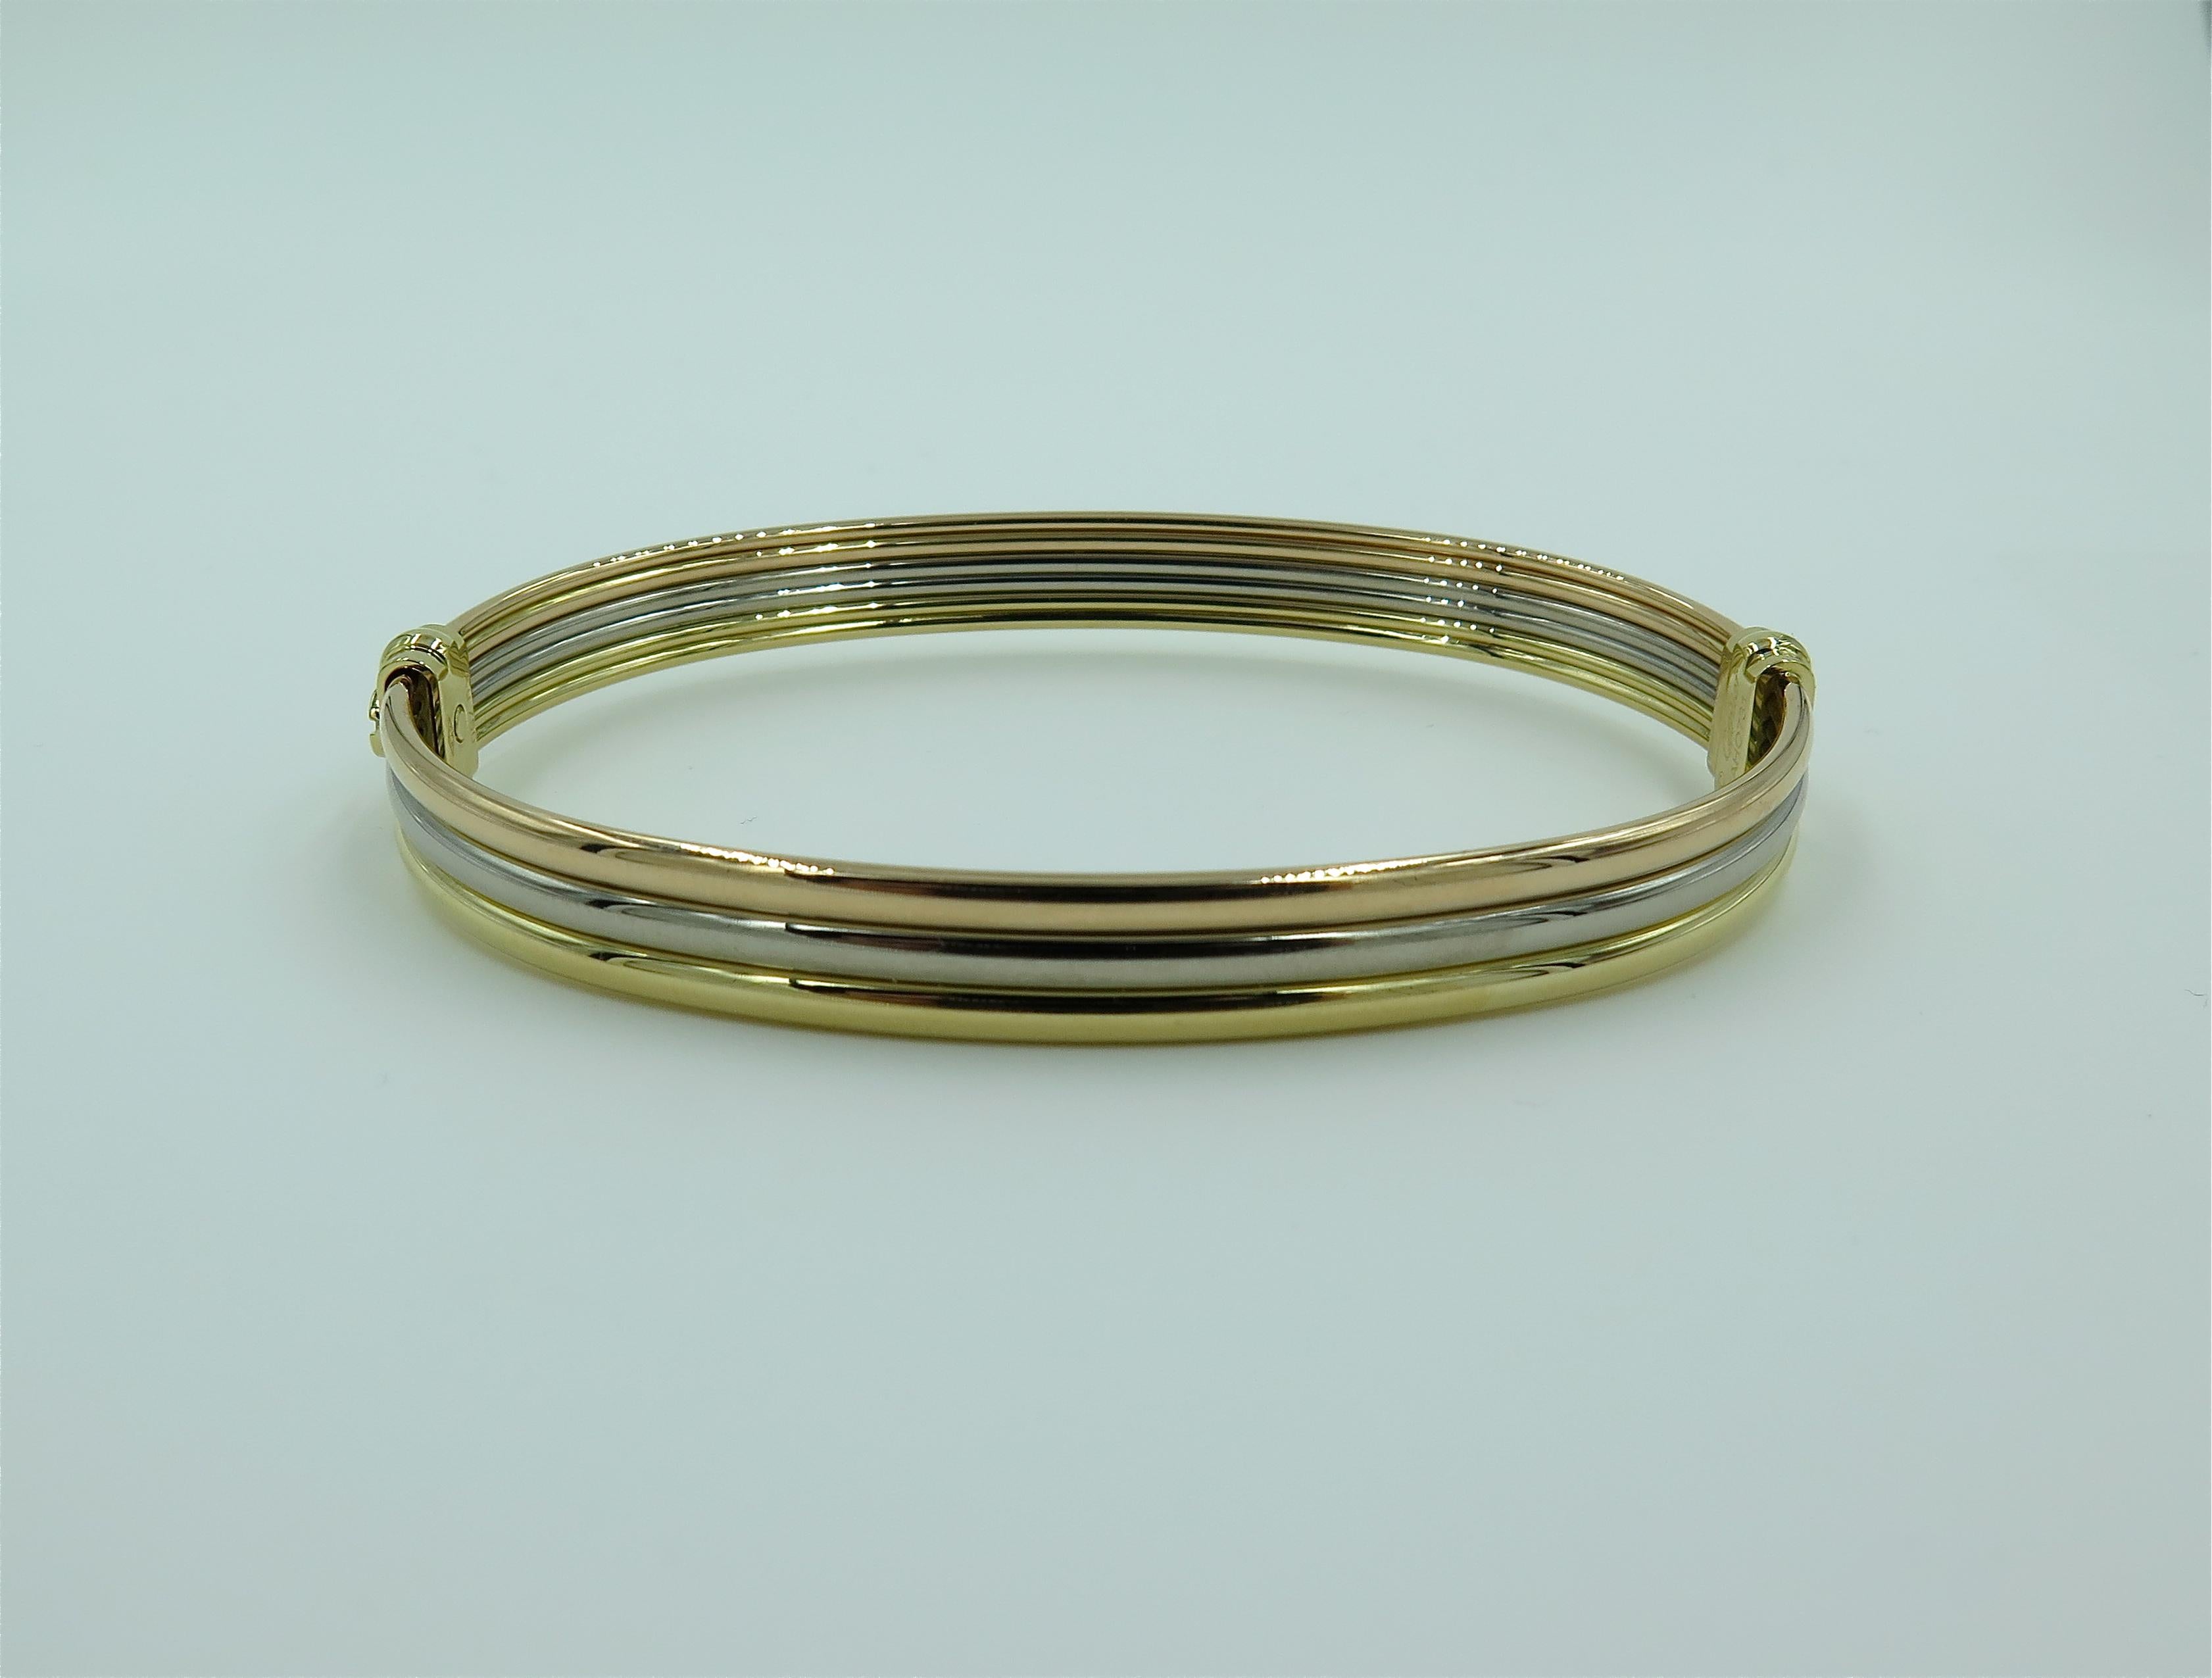 An 18 Tri colored gold bangle. Cartier. Designed as a polished hinged rose, white and yellow gold bangle, joined by a screw closure. Inside measurement is approximately 8 Incas, diameter is approximately 3 inches. Stamped Cartier, numbered AHO731.